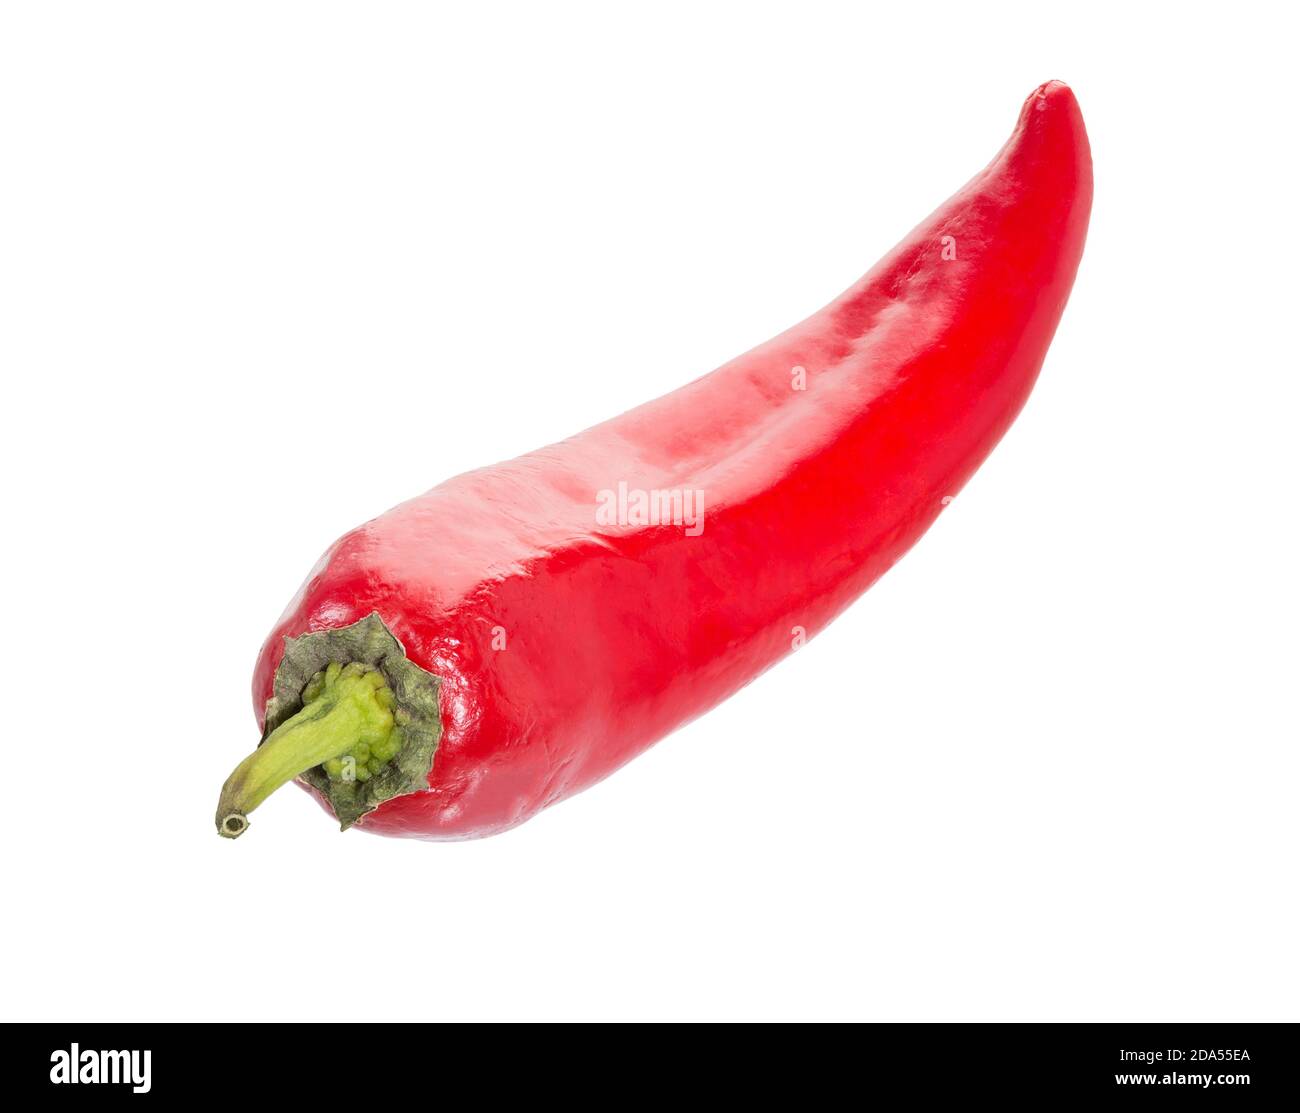 Chili pepper isolated on a white background. Red Chili hot pepper clipping path. Fresh pepper. Stock Photo